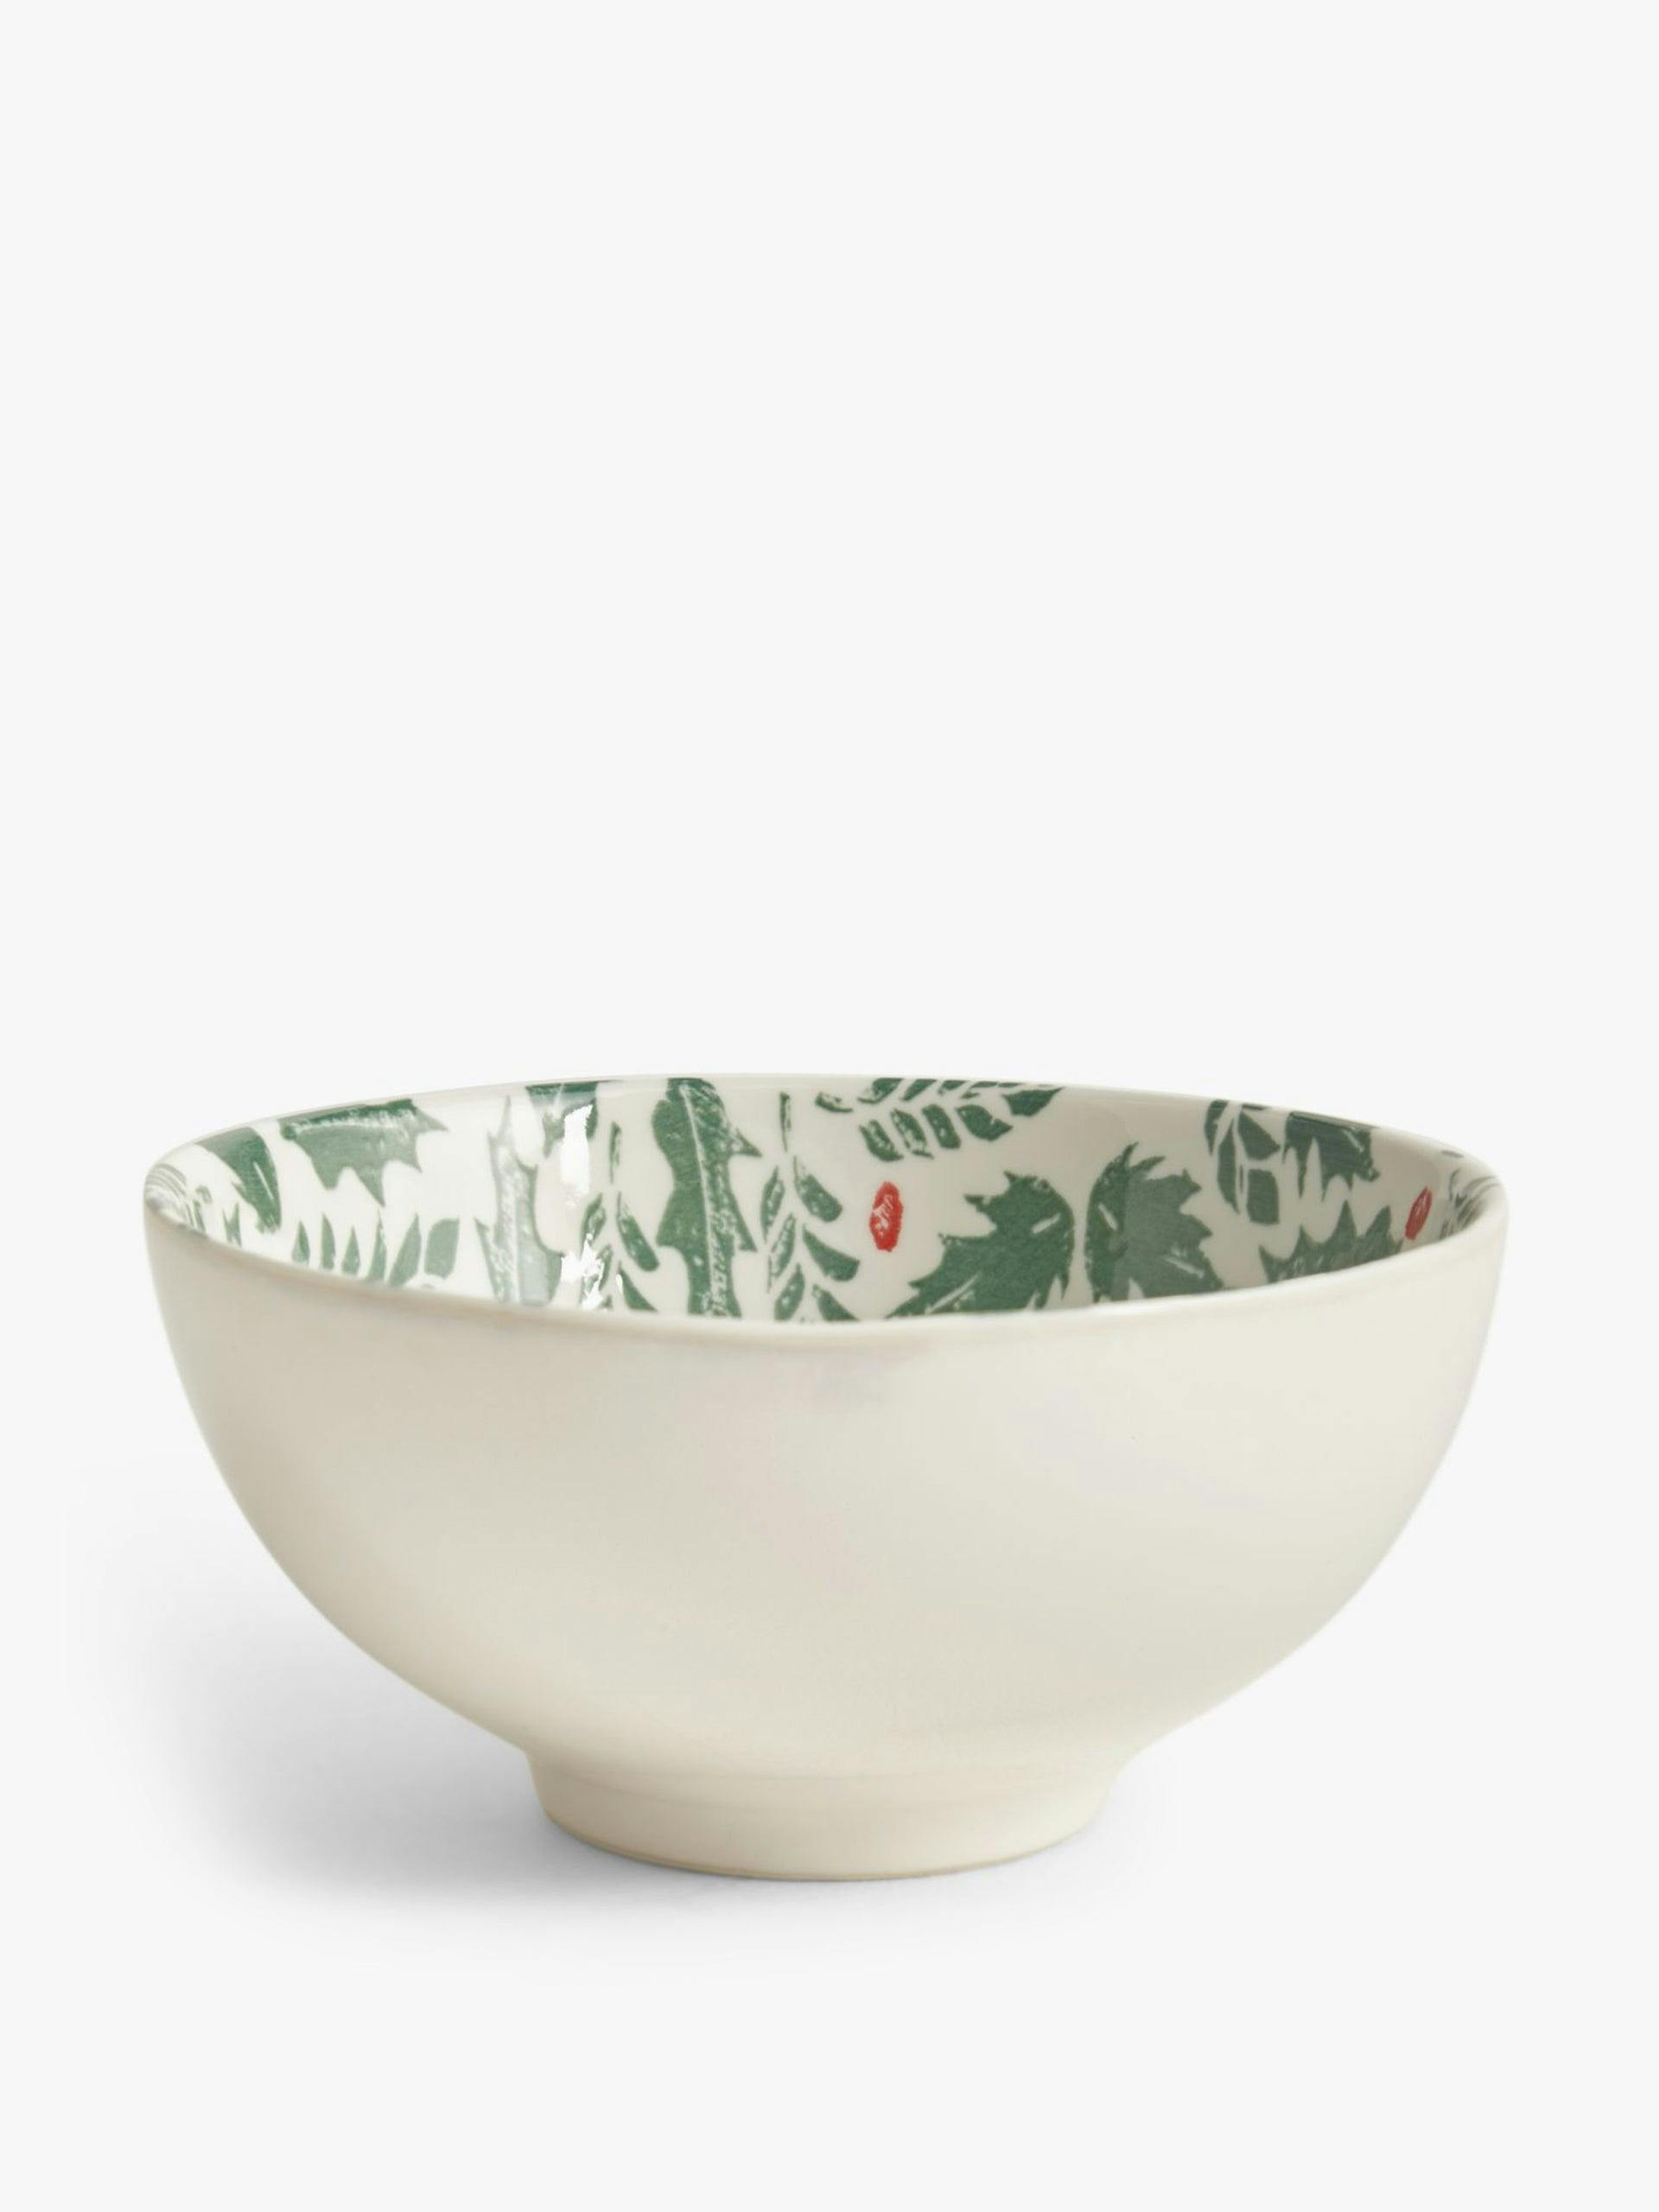 Small bowl with winter berries design